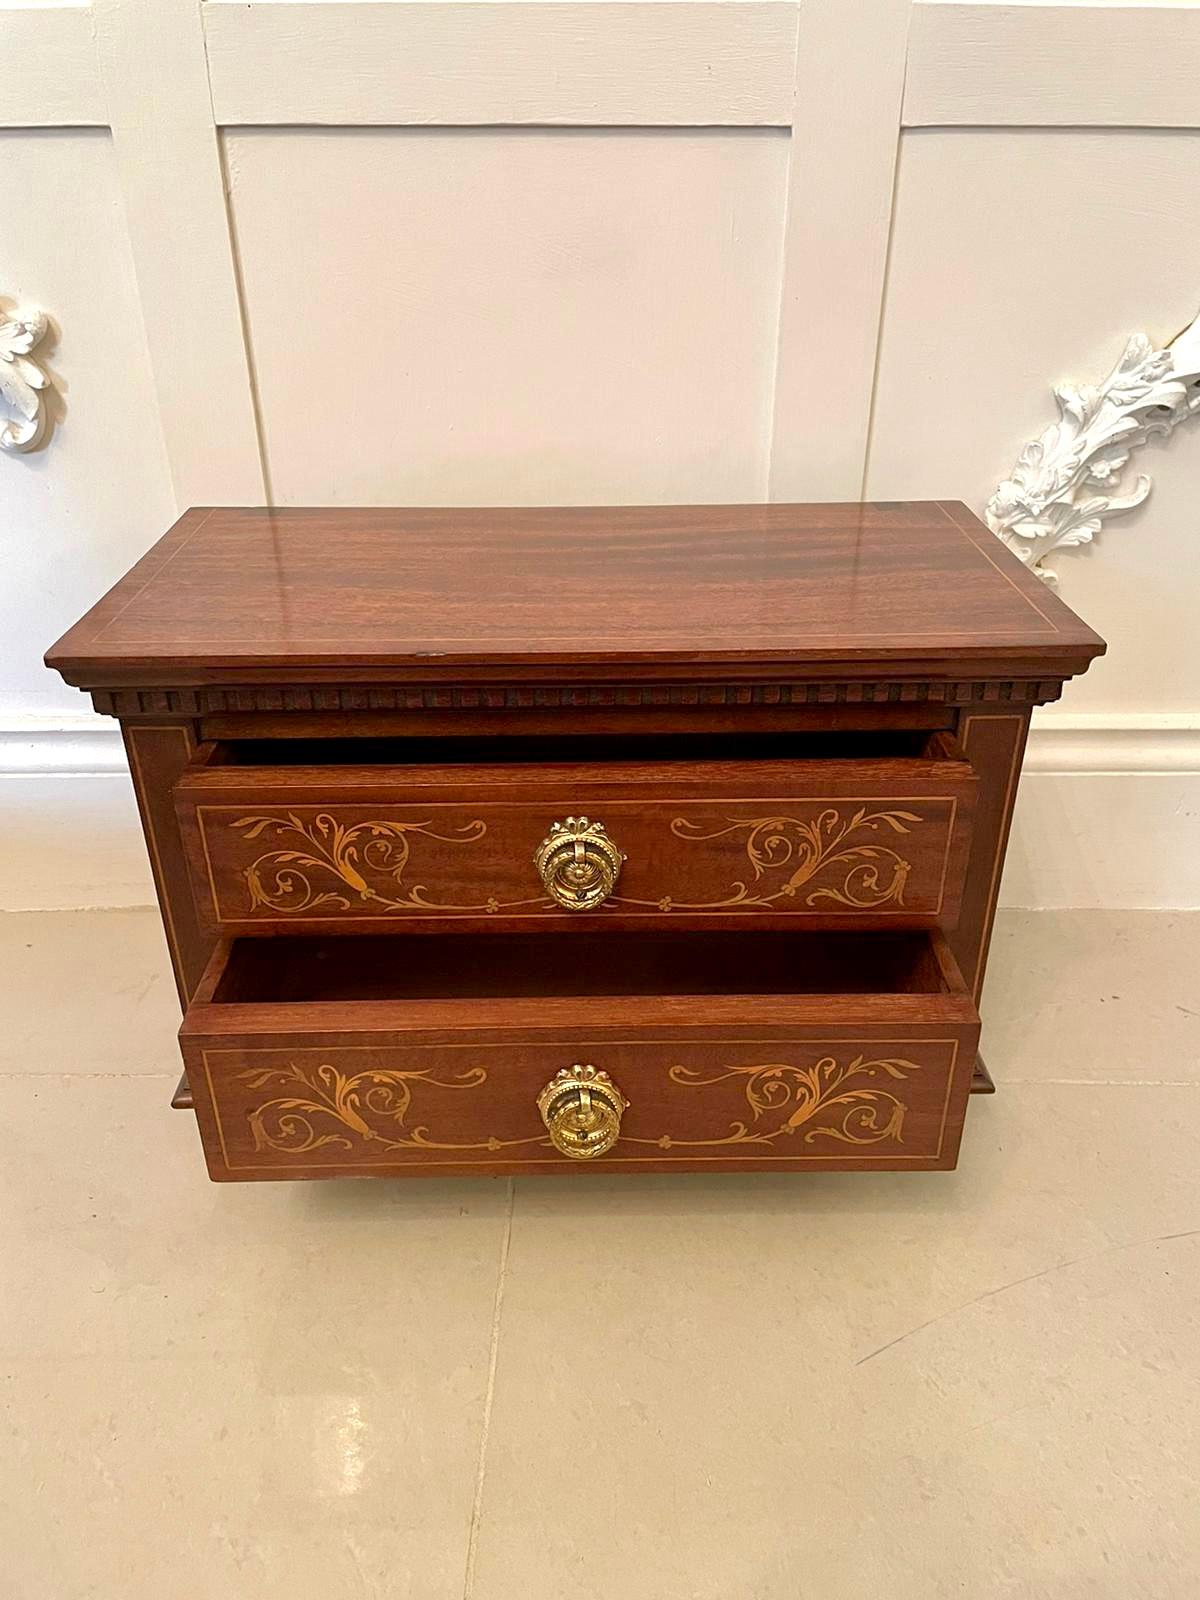 Early 20th Century Quality Pair of Antique Edwardian Inlaid Mahogany Chests